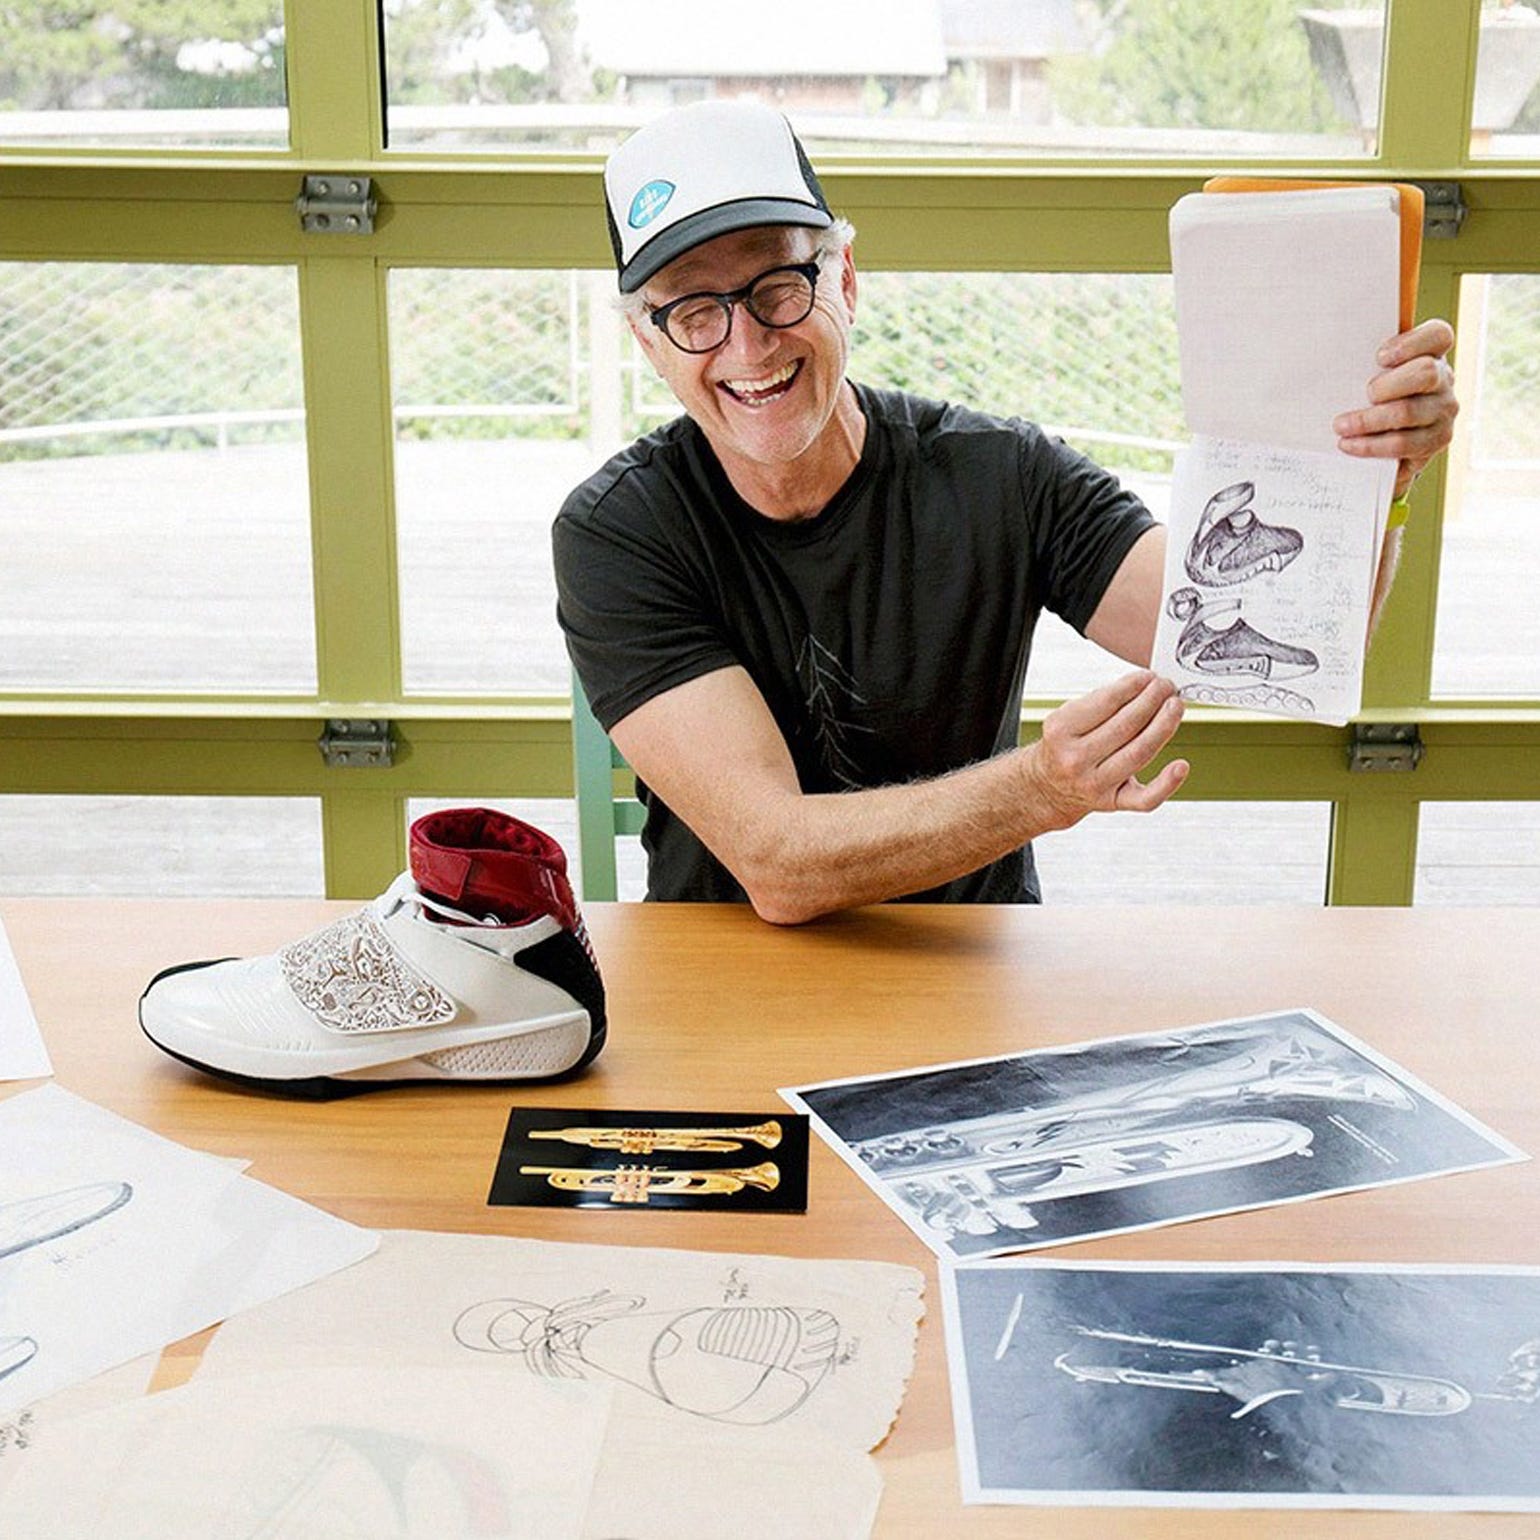 The Art of Design: Tinker Hatfield | by Andy Orme | Medium